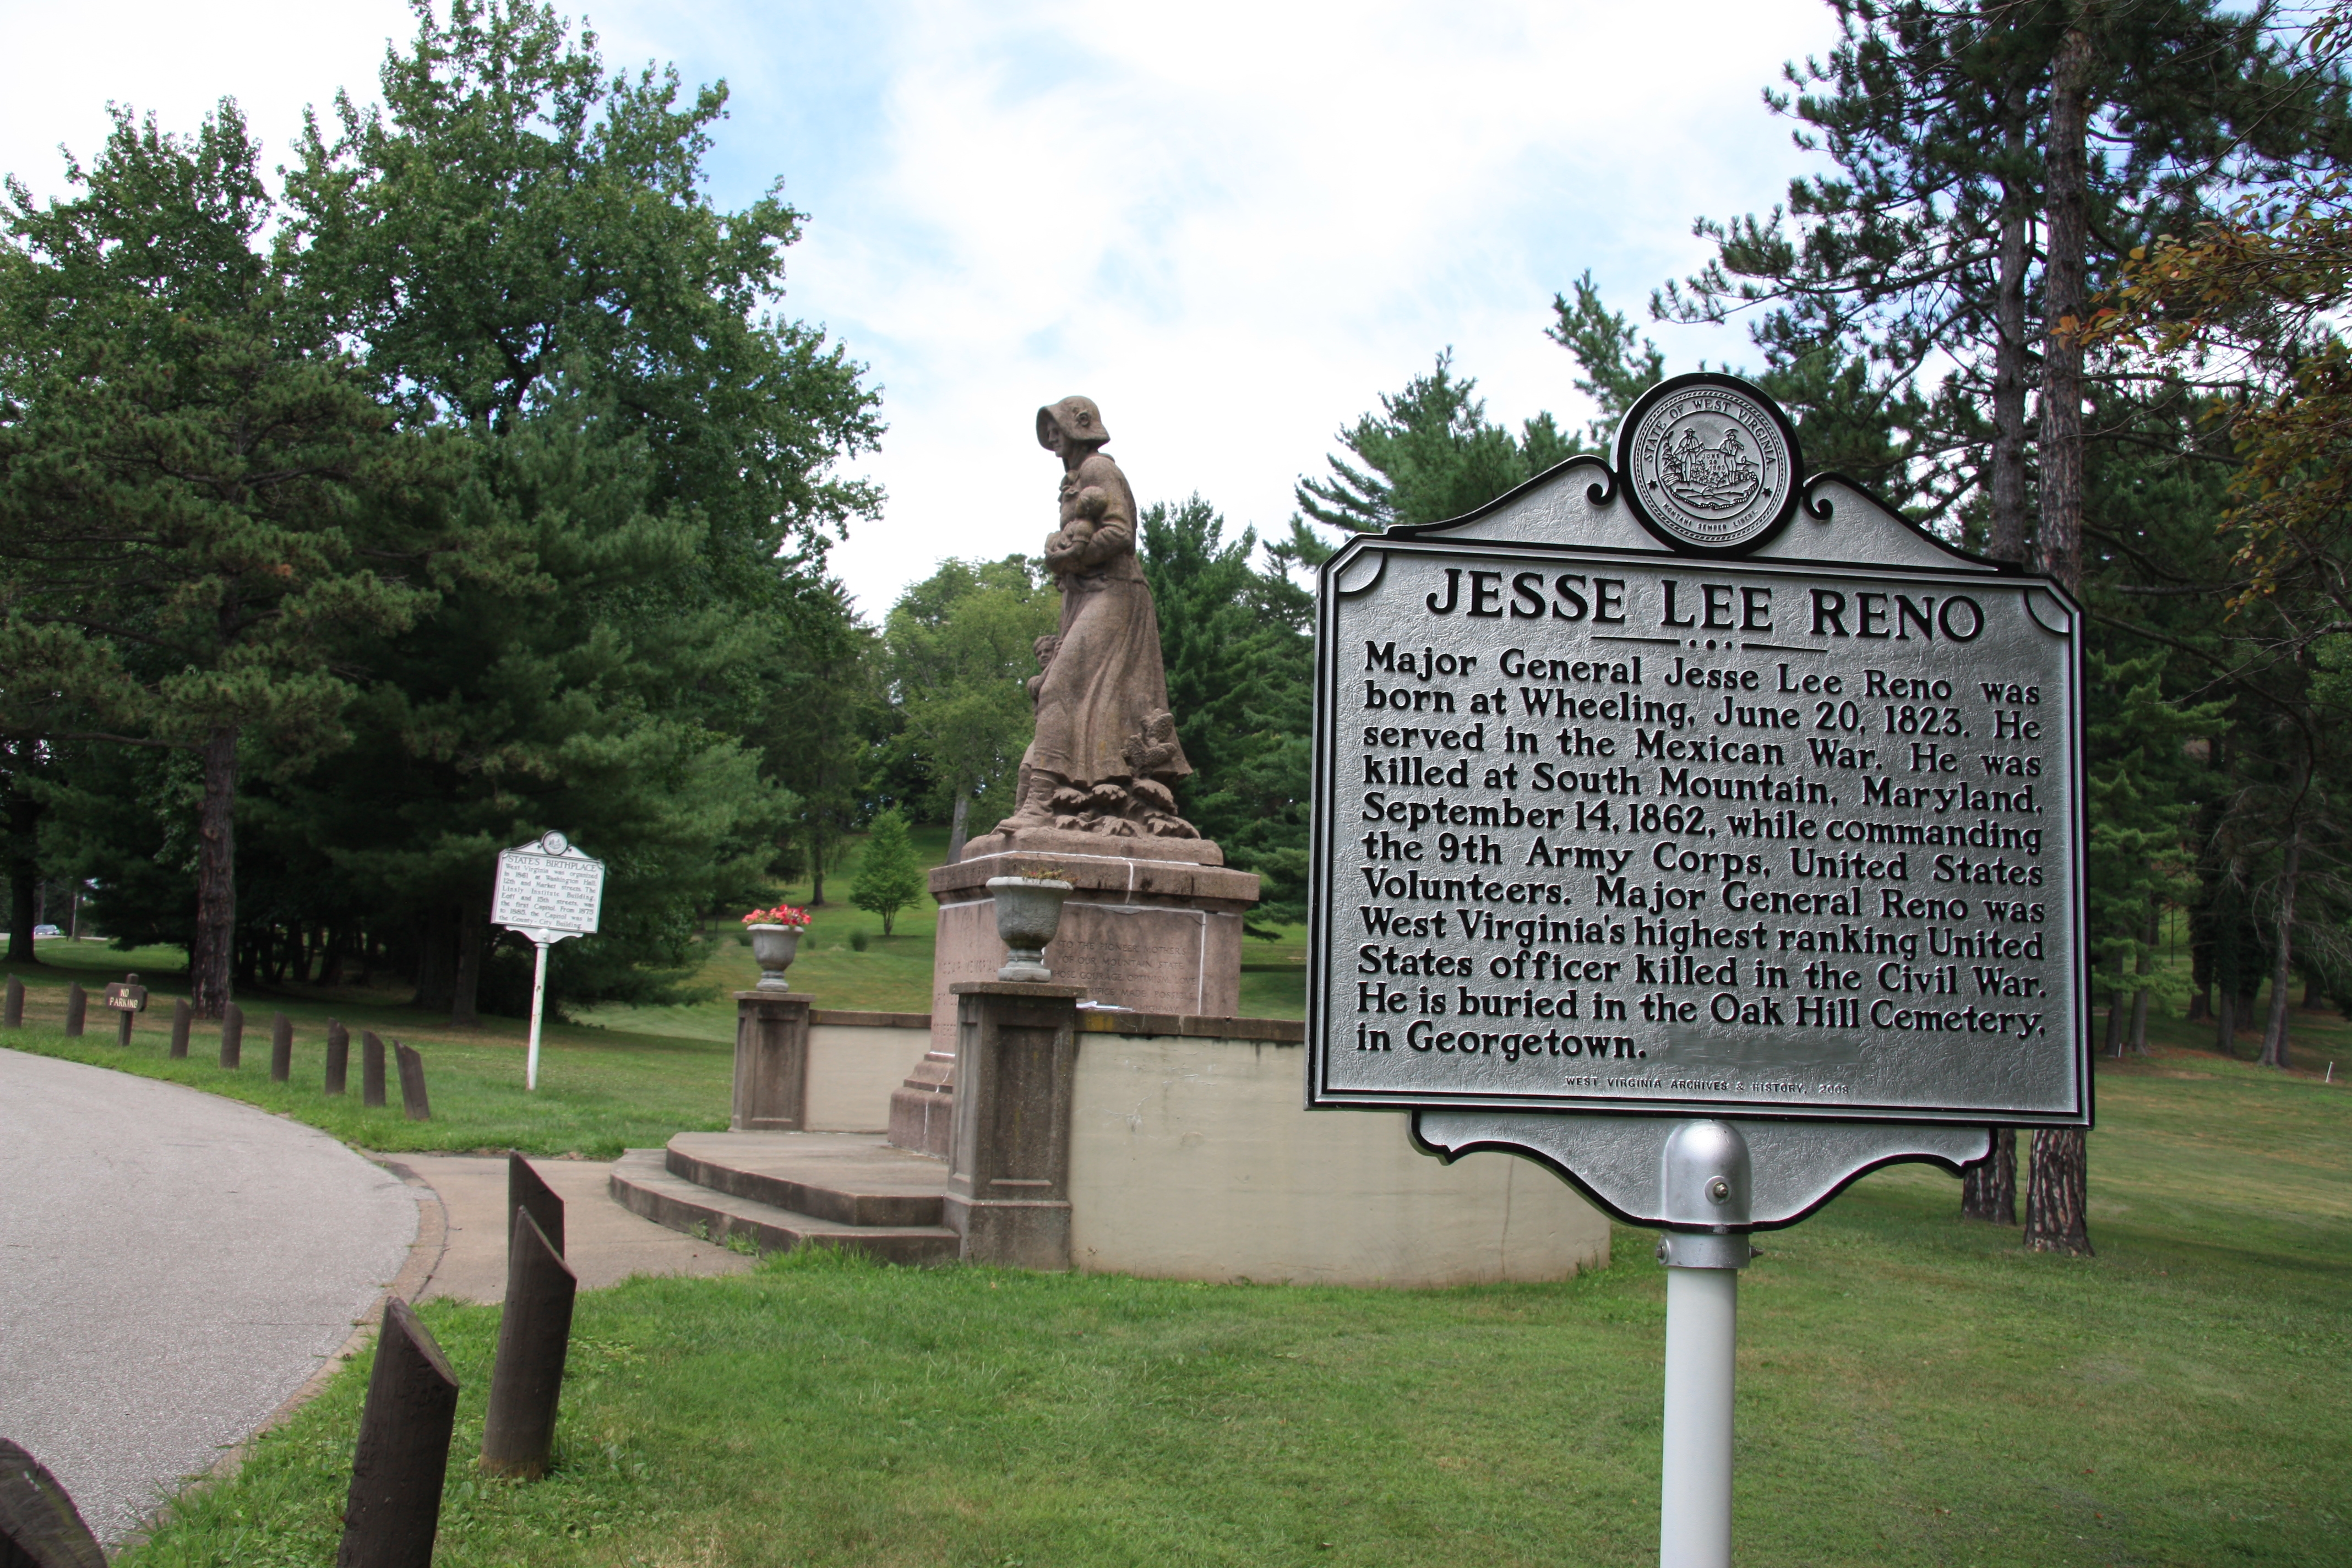 Jesse Lee Reno Historical Marker, with the Madonna of the Trailer monument nearby